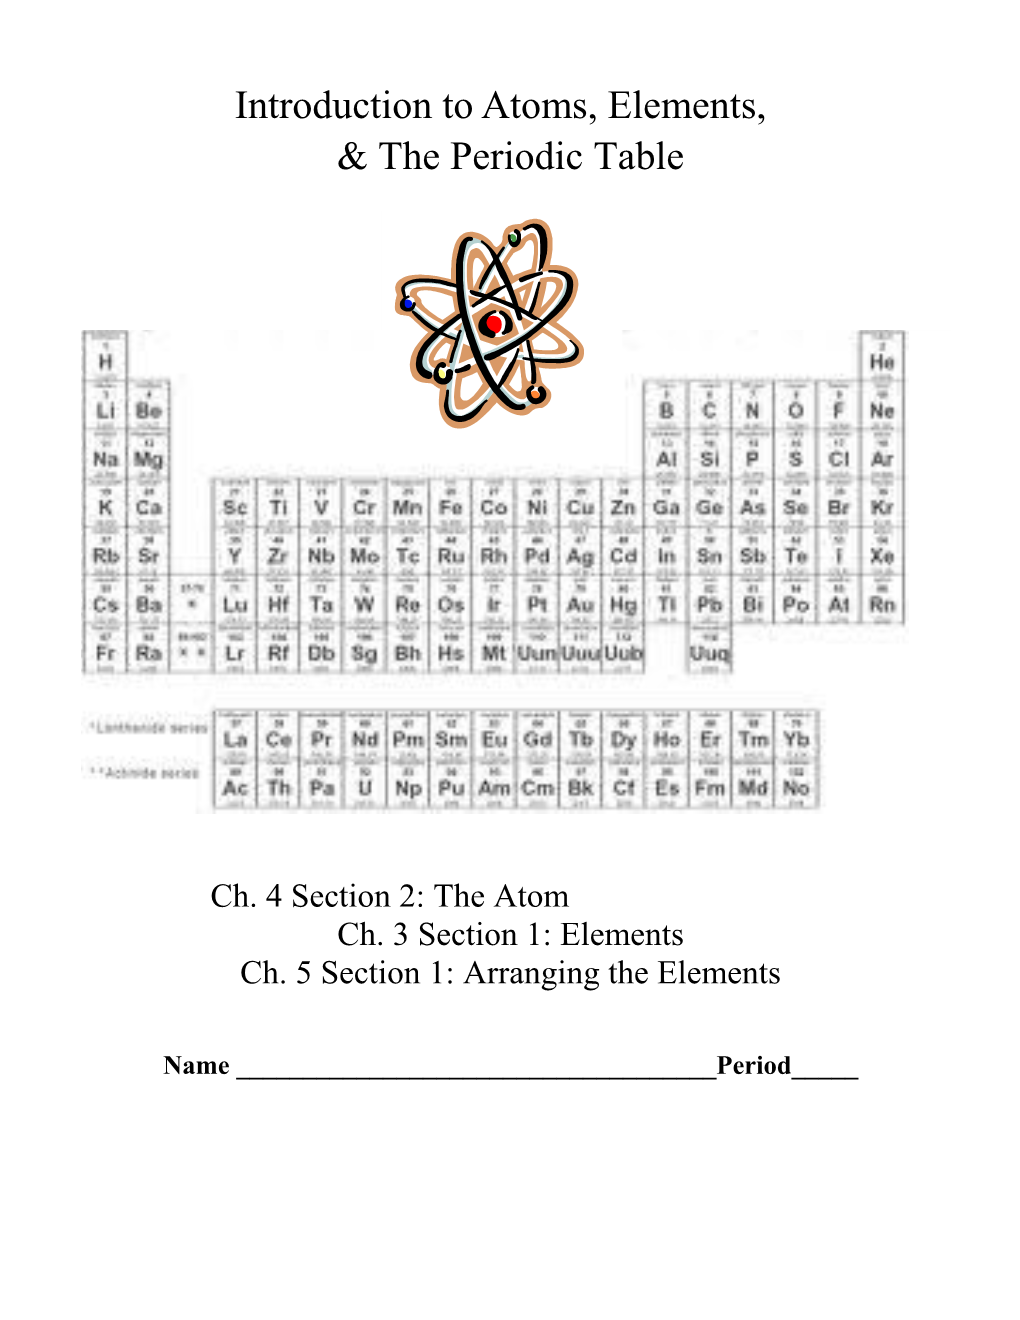 Introduction to Atoms, Elements